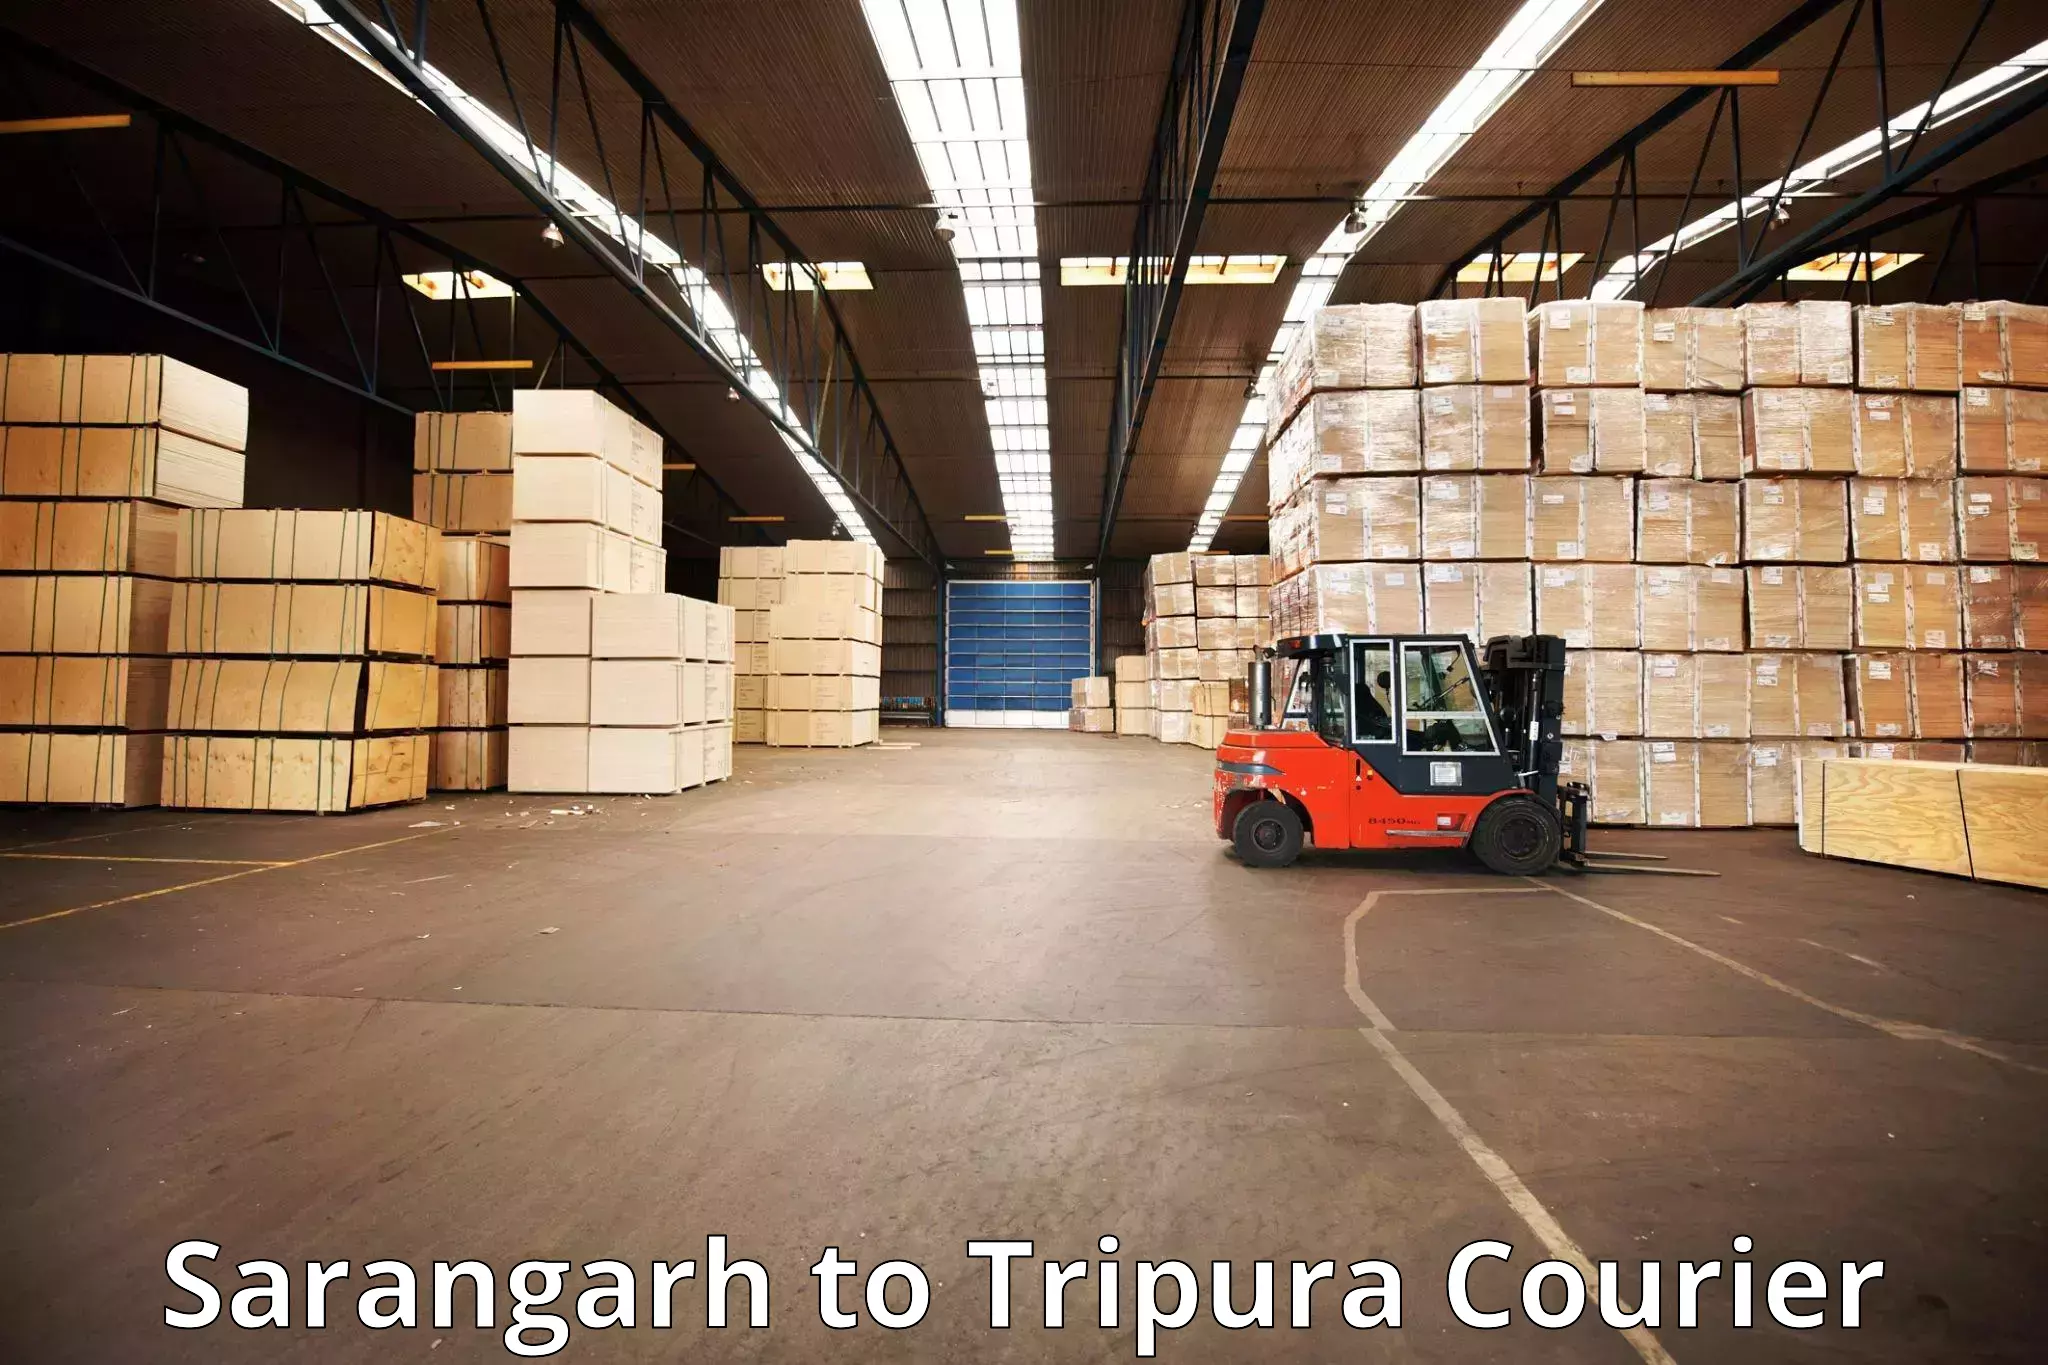 Baggage delivery support Sarangarh to Udaipur Tripura